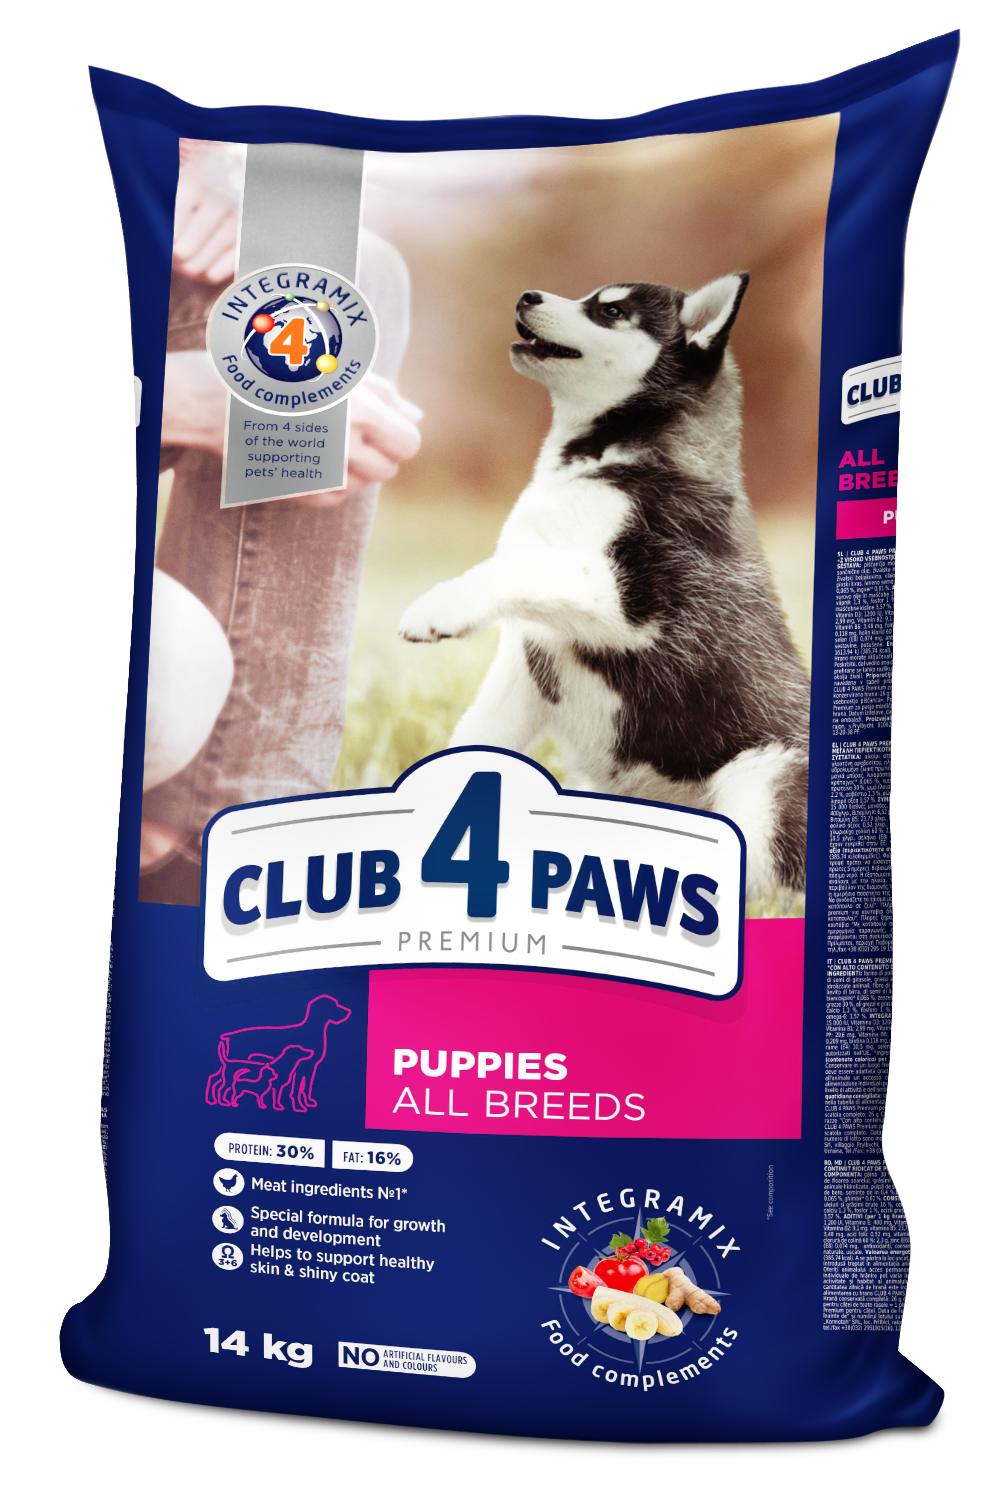 CLUB 4 PAWS Premium For Puppies of All Breeds, Rich in chicken